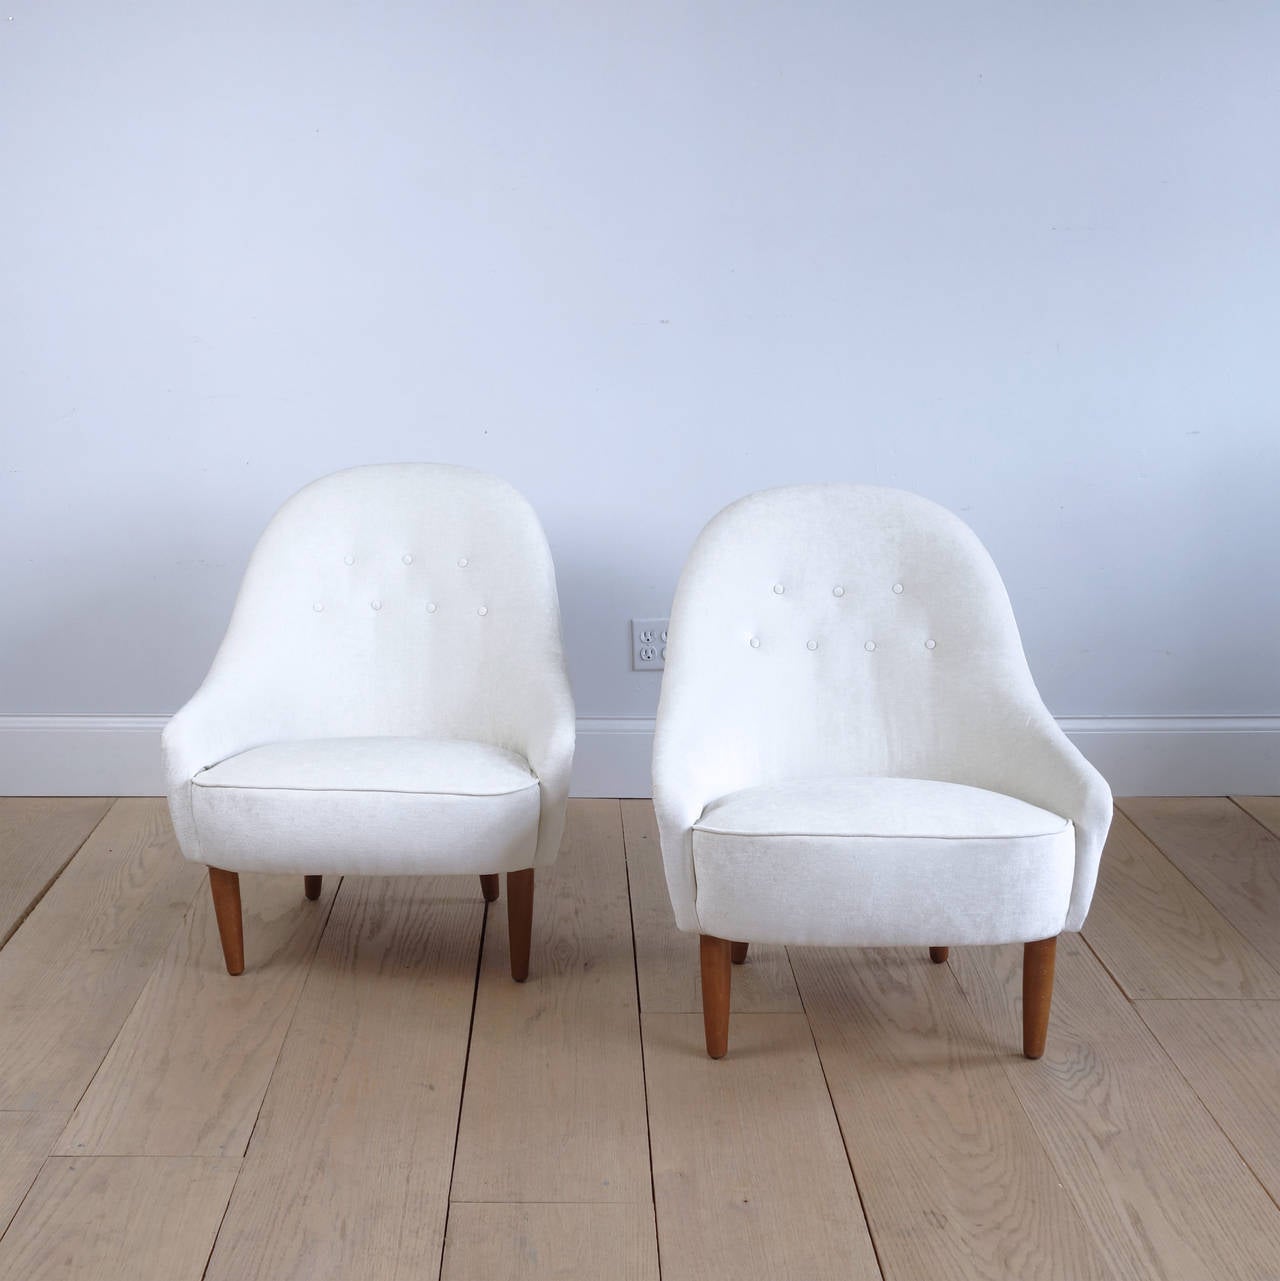 A graceful and exceedingly comfortable pair of lounge chairs probably designed by the unassuming Carl Malmsten, who said 